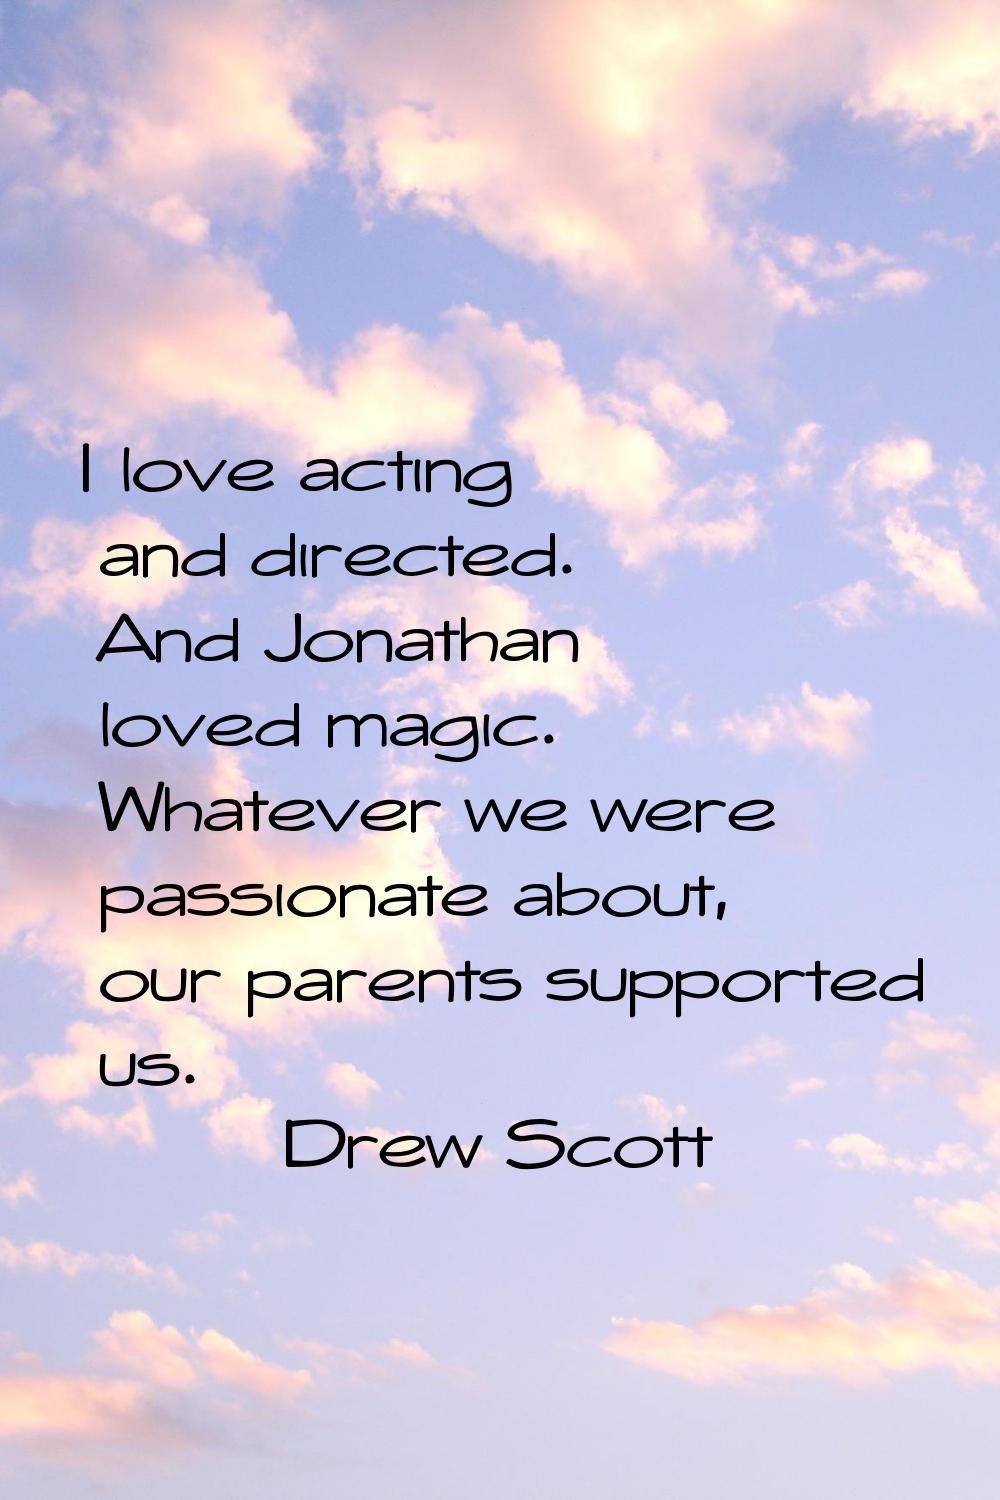 I love acting and directed. And Jonathan loved magic. Whatever we were passionate about, our parent